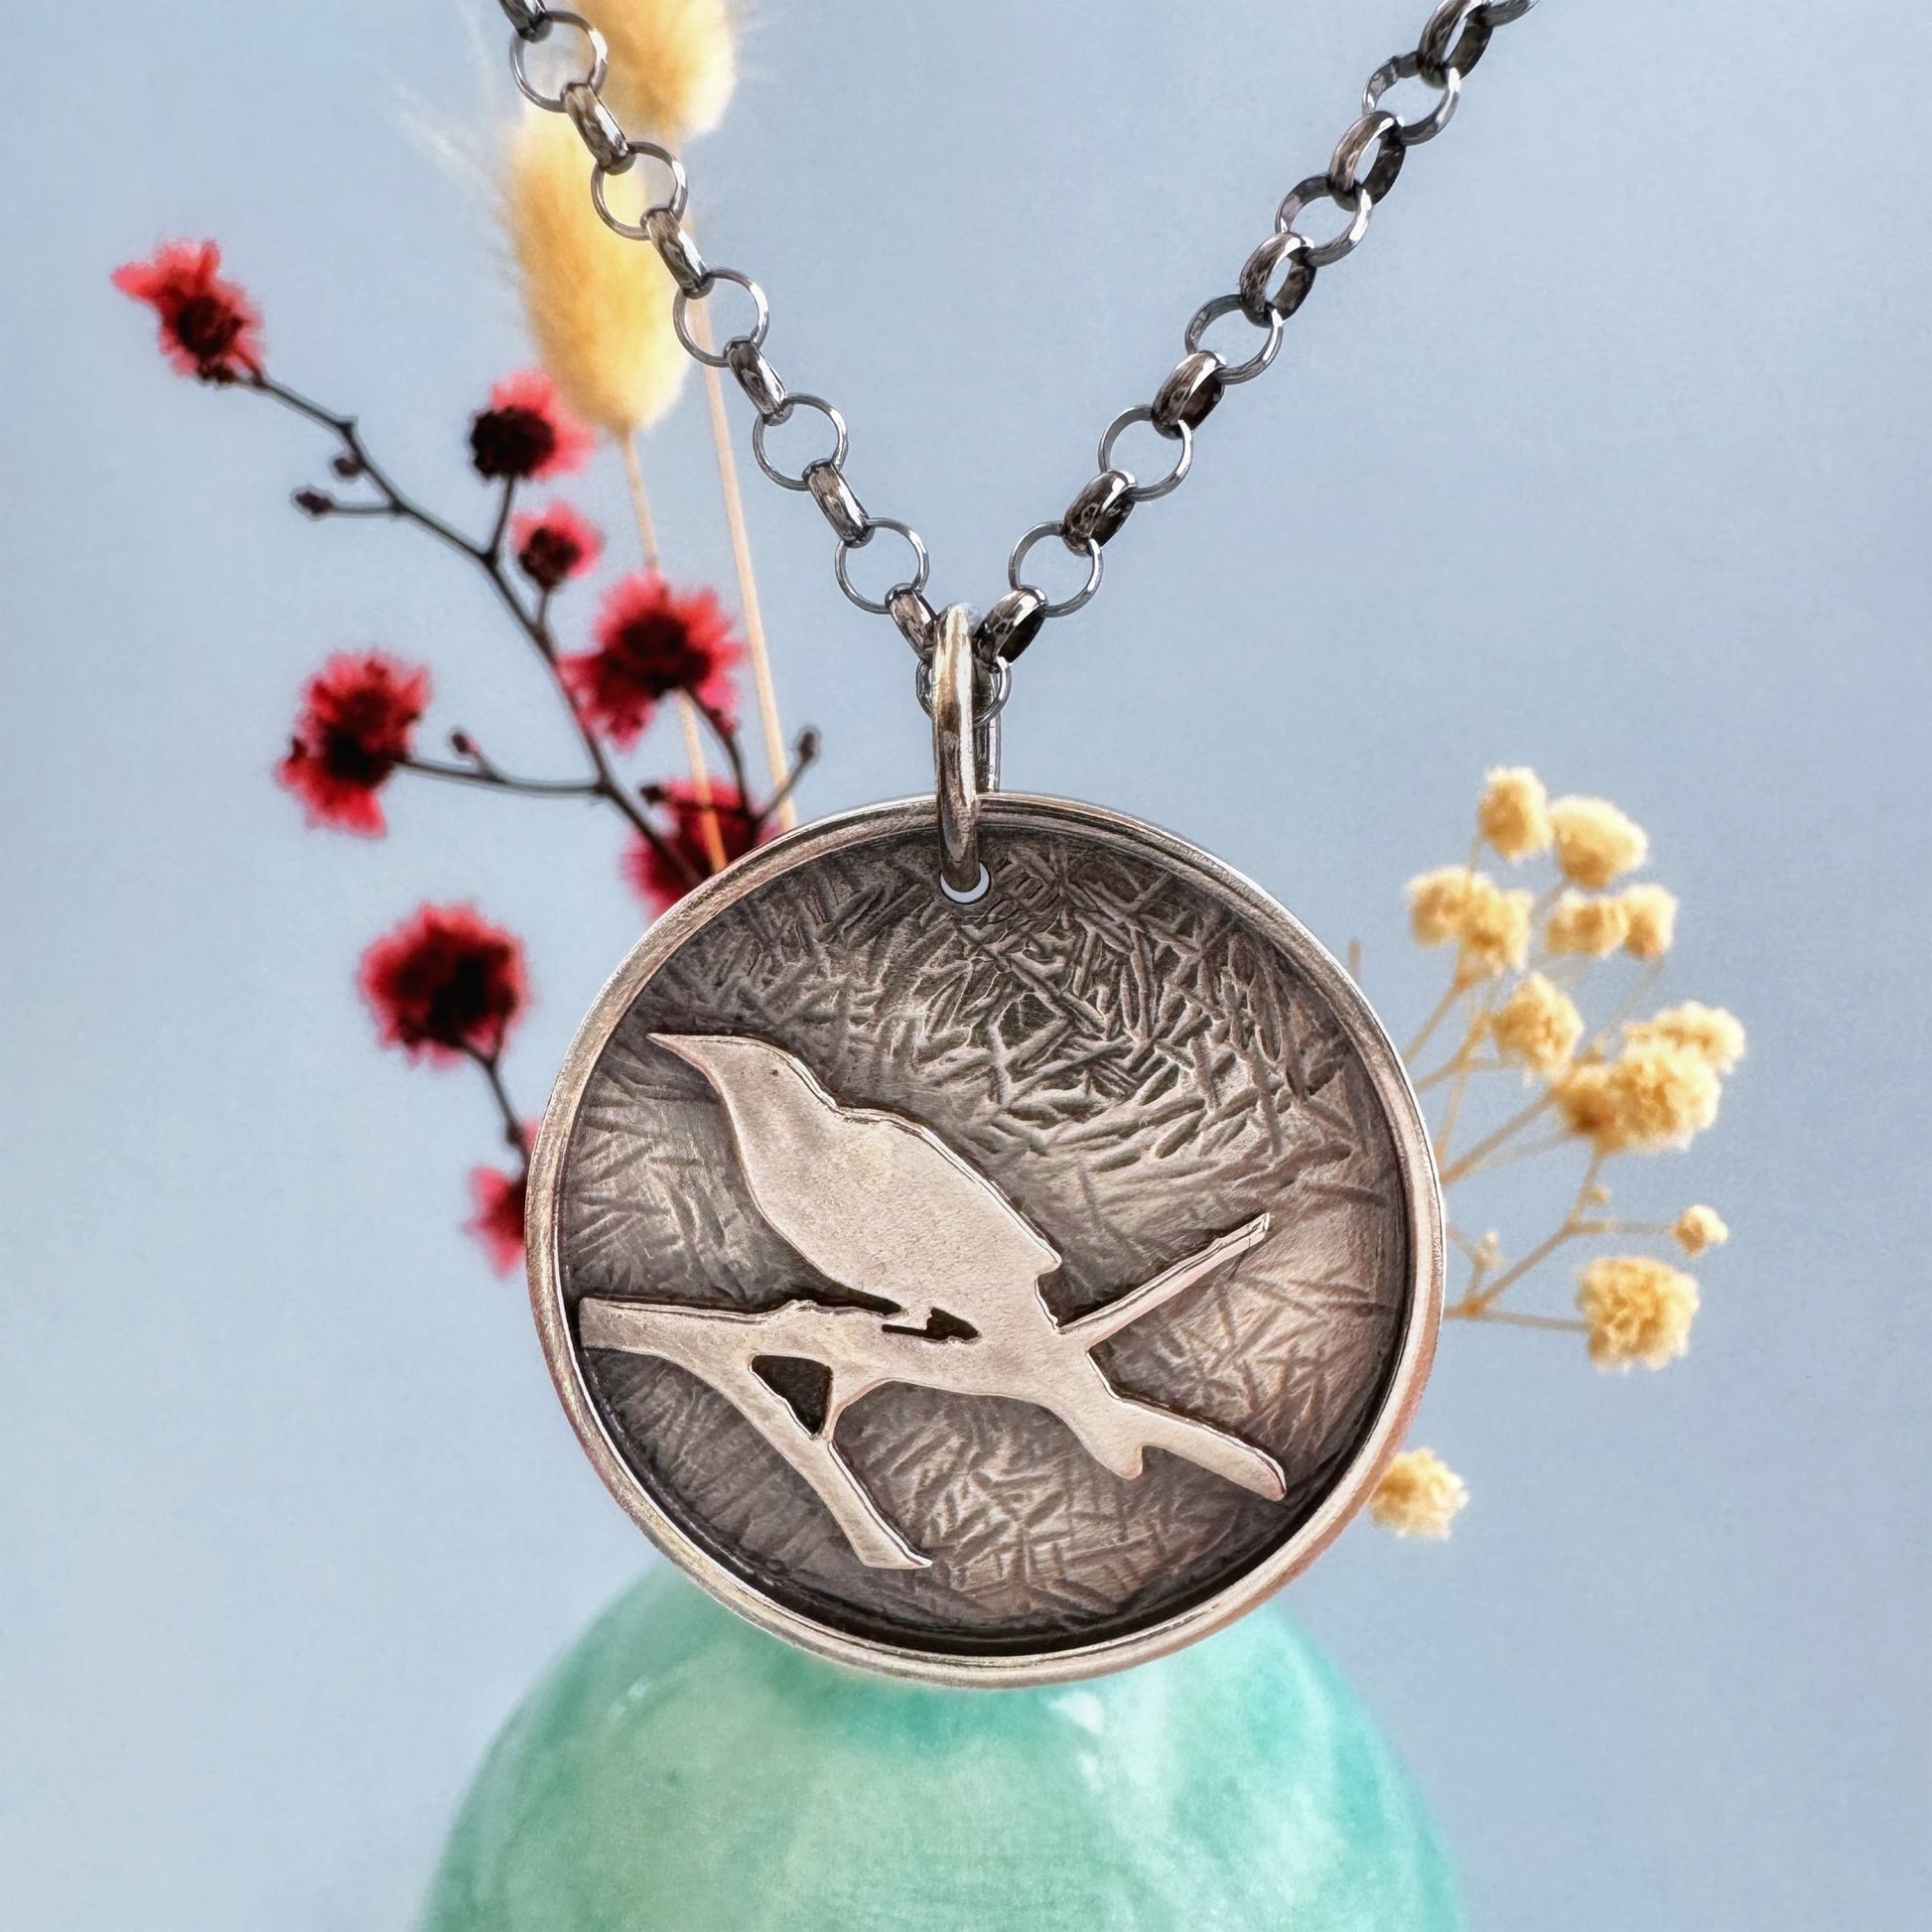 A round sterling silver pendant hangs from a rolo style chain. The pendant features a raised raven or crow sitting on the branch of a tree. The background has been hammered to represent leaves. The necklace is hanging in front of a pale green vase with cream and dark pink dried flowers, in front of a pale blue background.